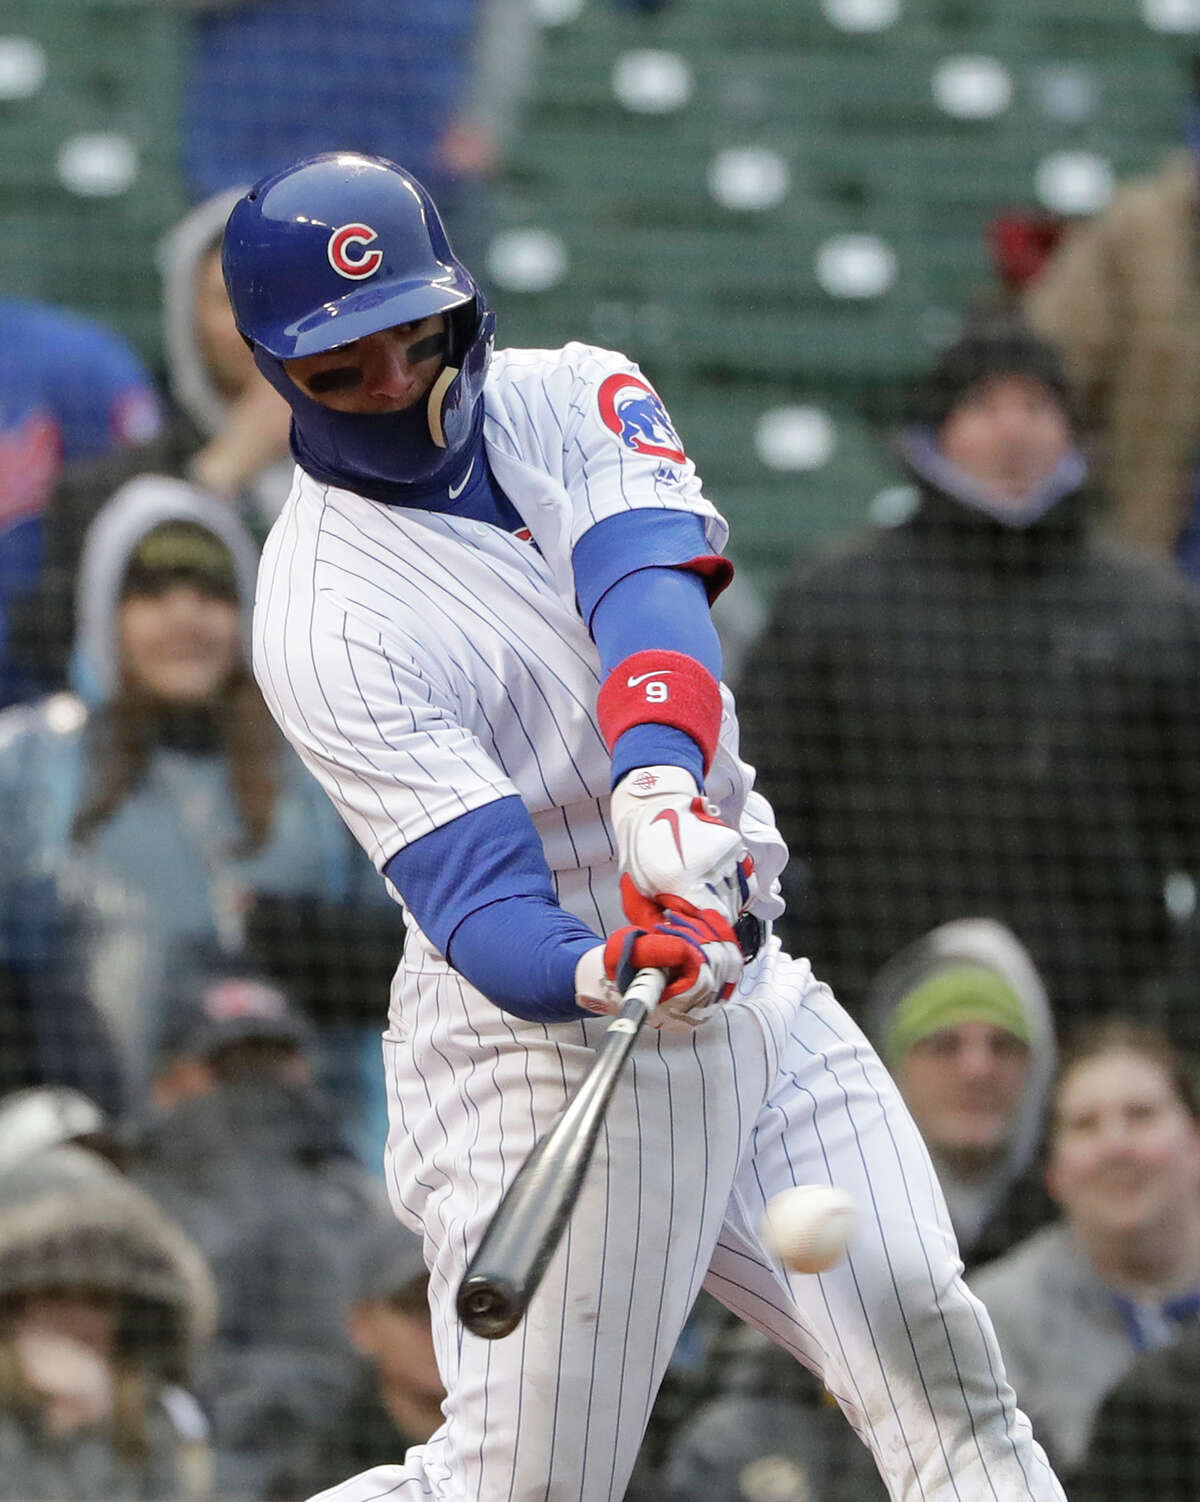 Chicago Cubs' Javier Baez hits a three-run double against the Atlanta Braves during the eighth inning of a baseball game Saturday, April 14, 2018, in Chicago. The Cubs won 14-10. (AP Photo/Nam Y. Huh)